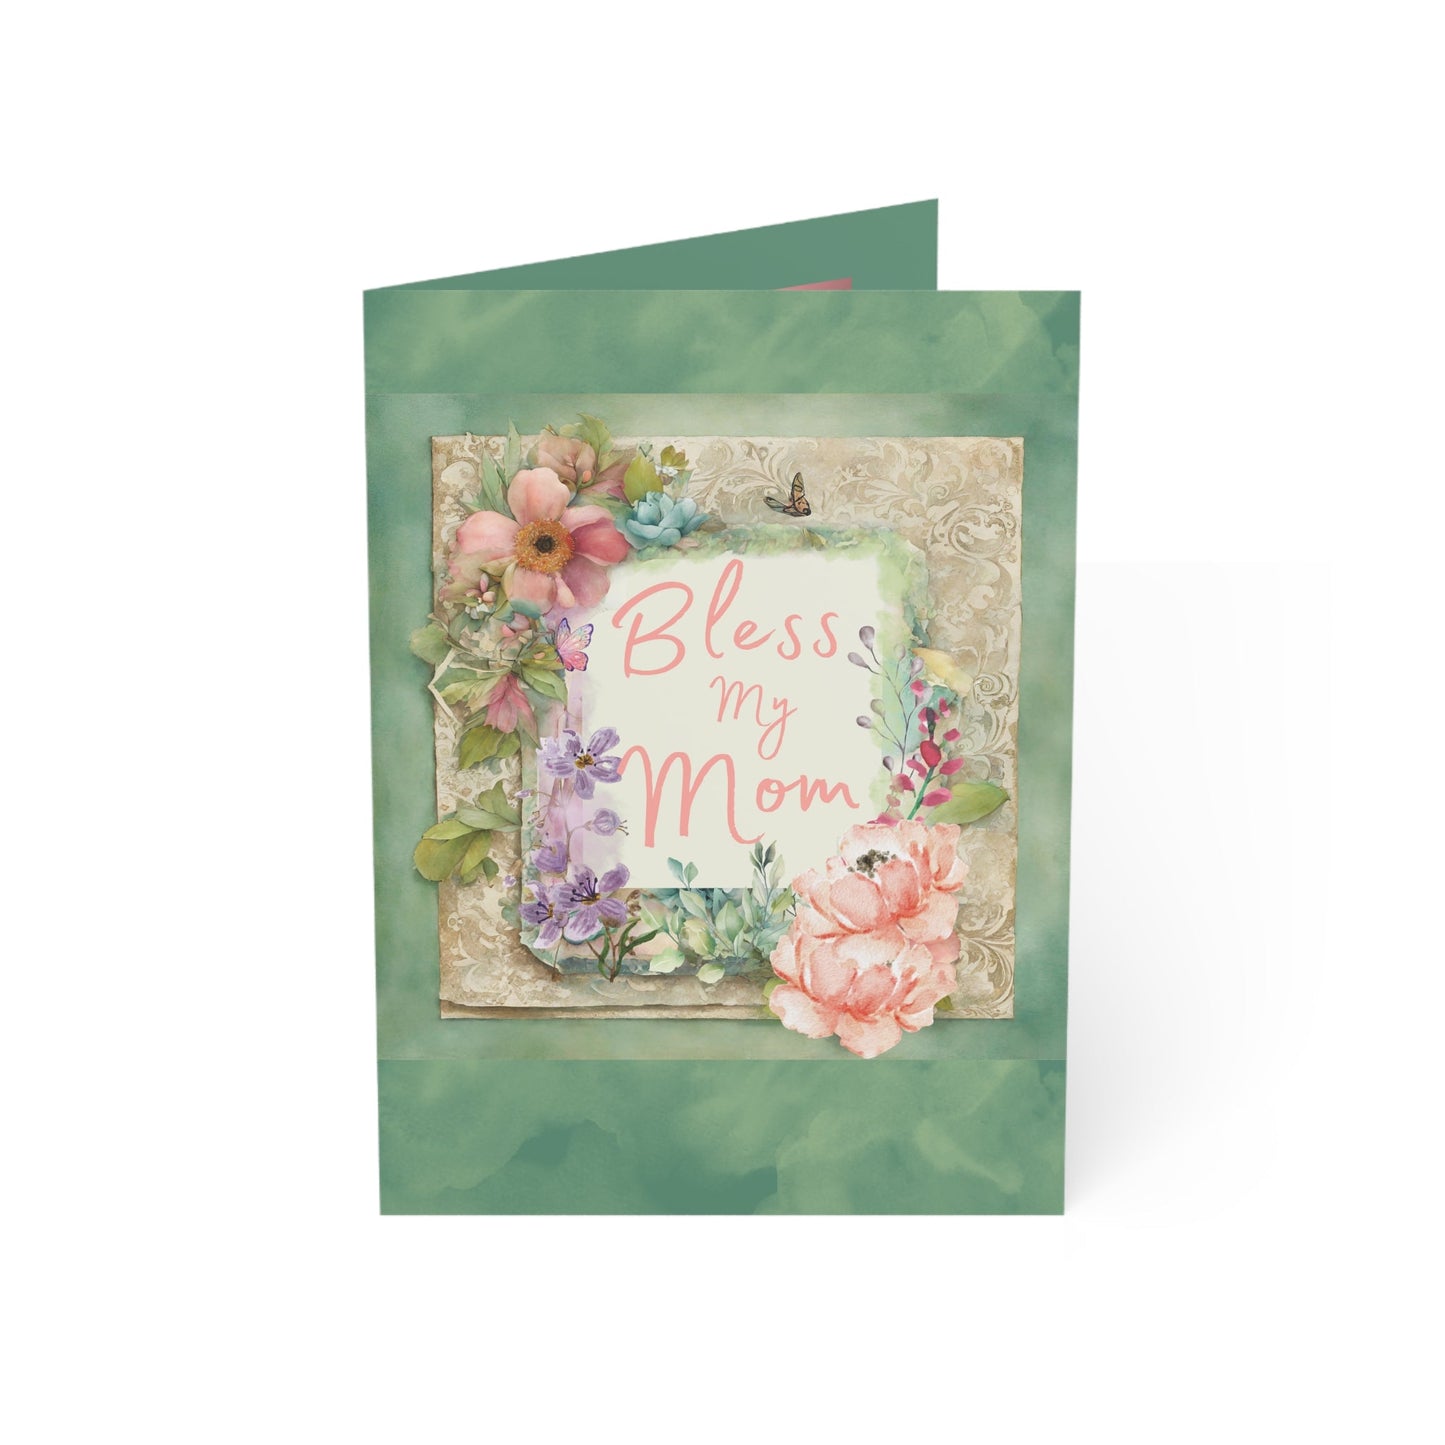 Bless My Mom Greeting Cards (10 pcs)